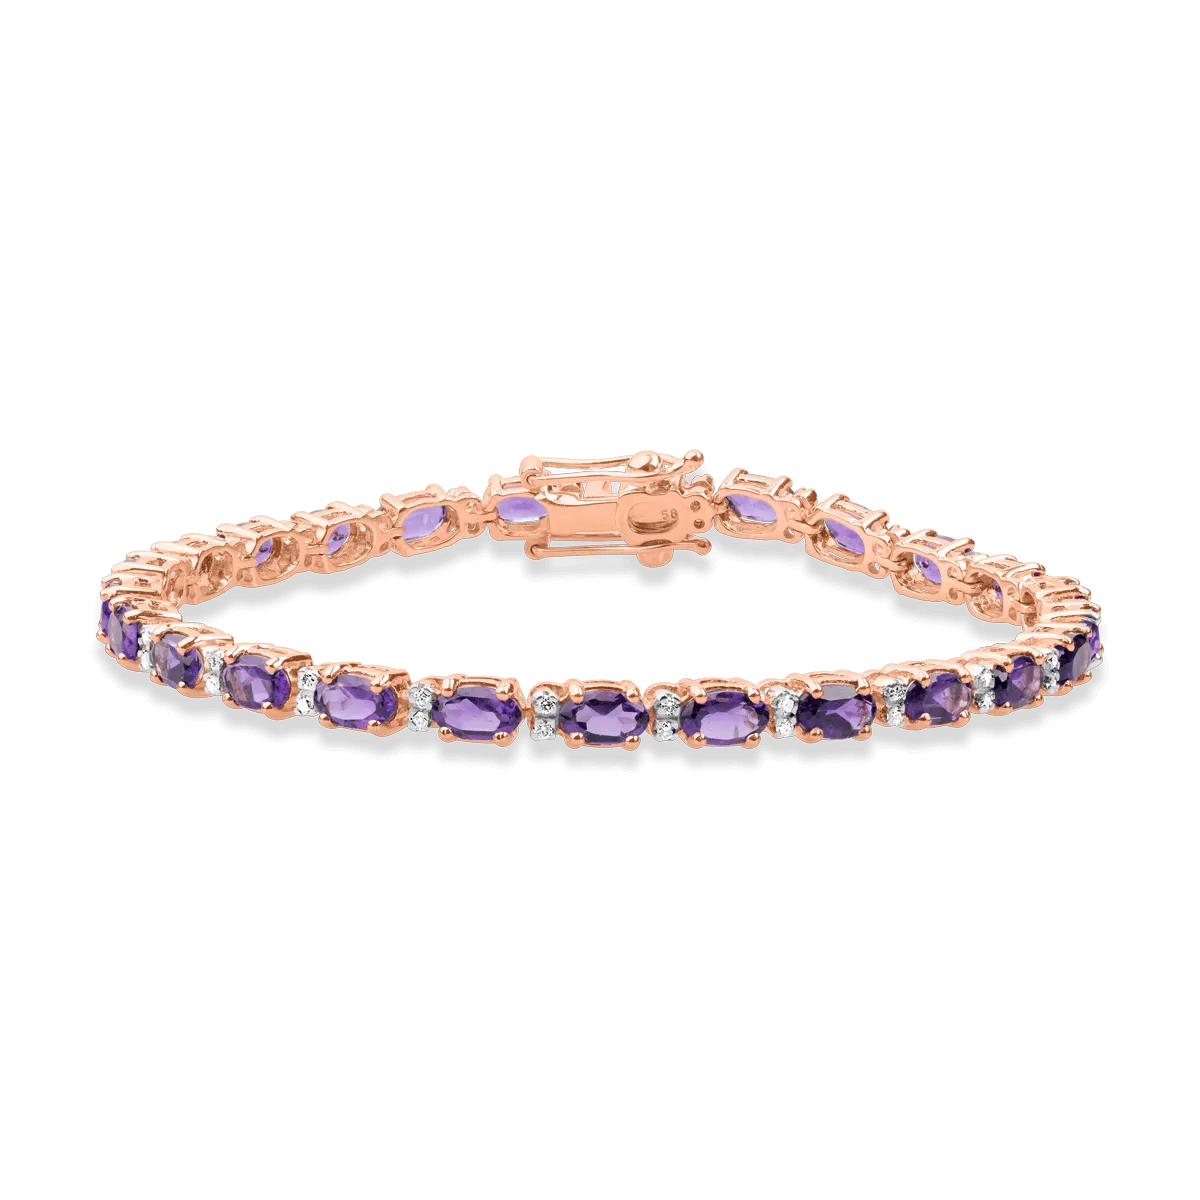 18K rose gold tennis bracelet with 5.6ct amethysts and 0.25ct diamonds